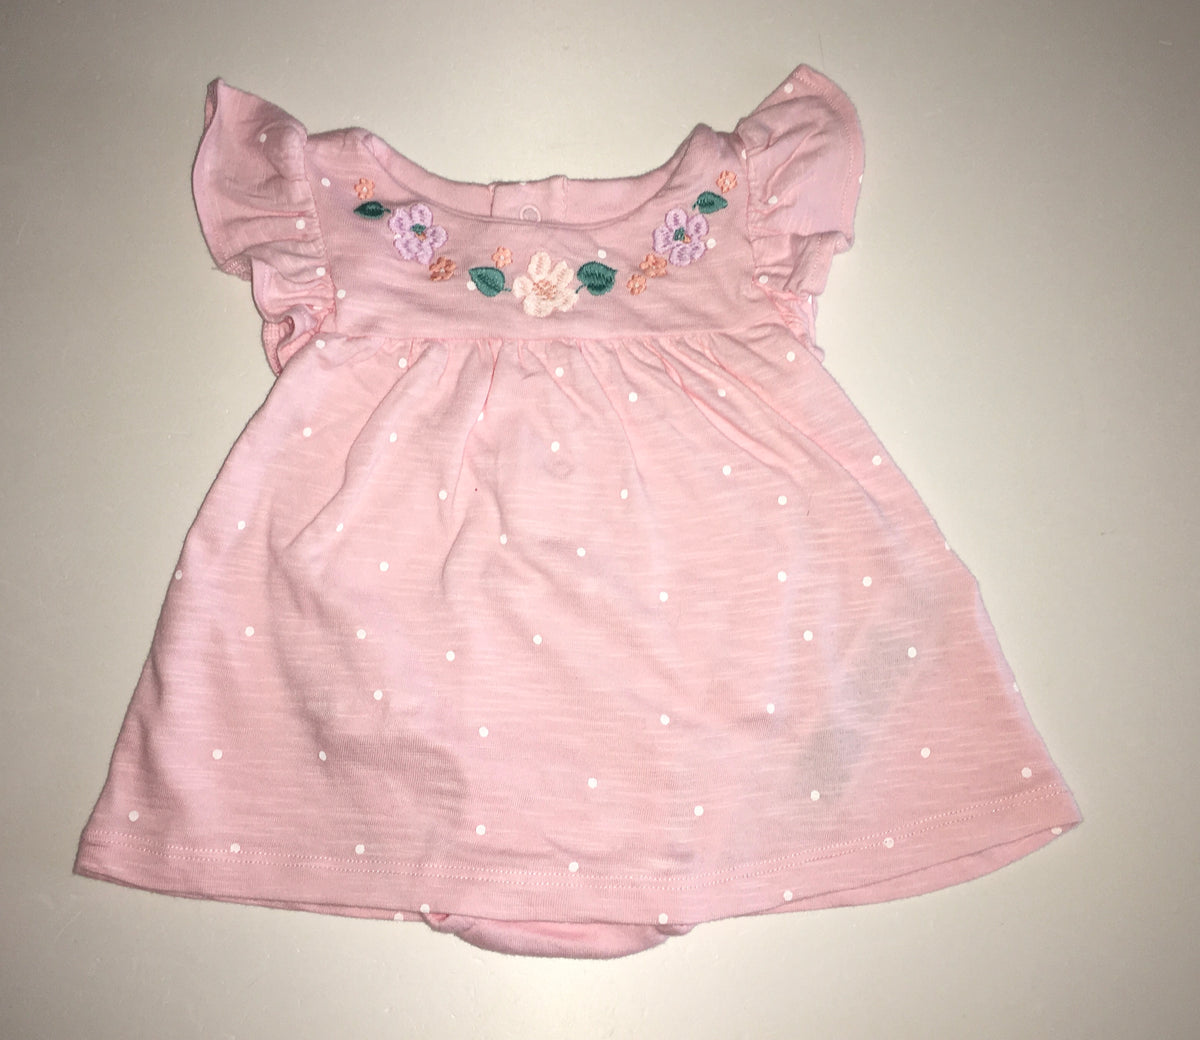 M&S Top, Girls First Size